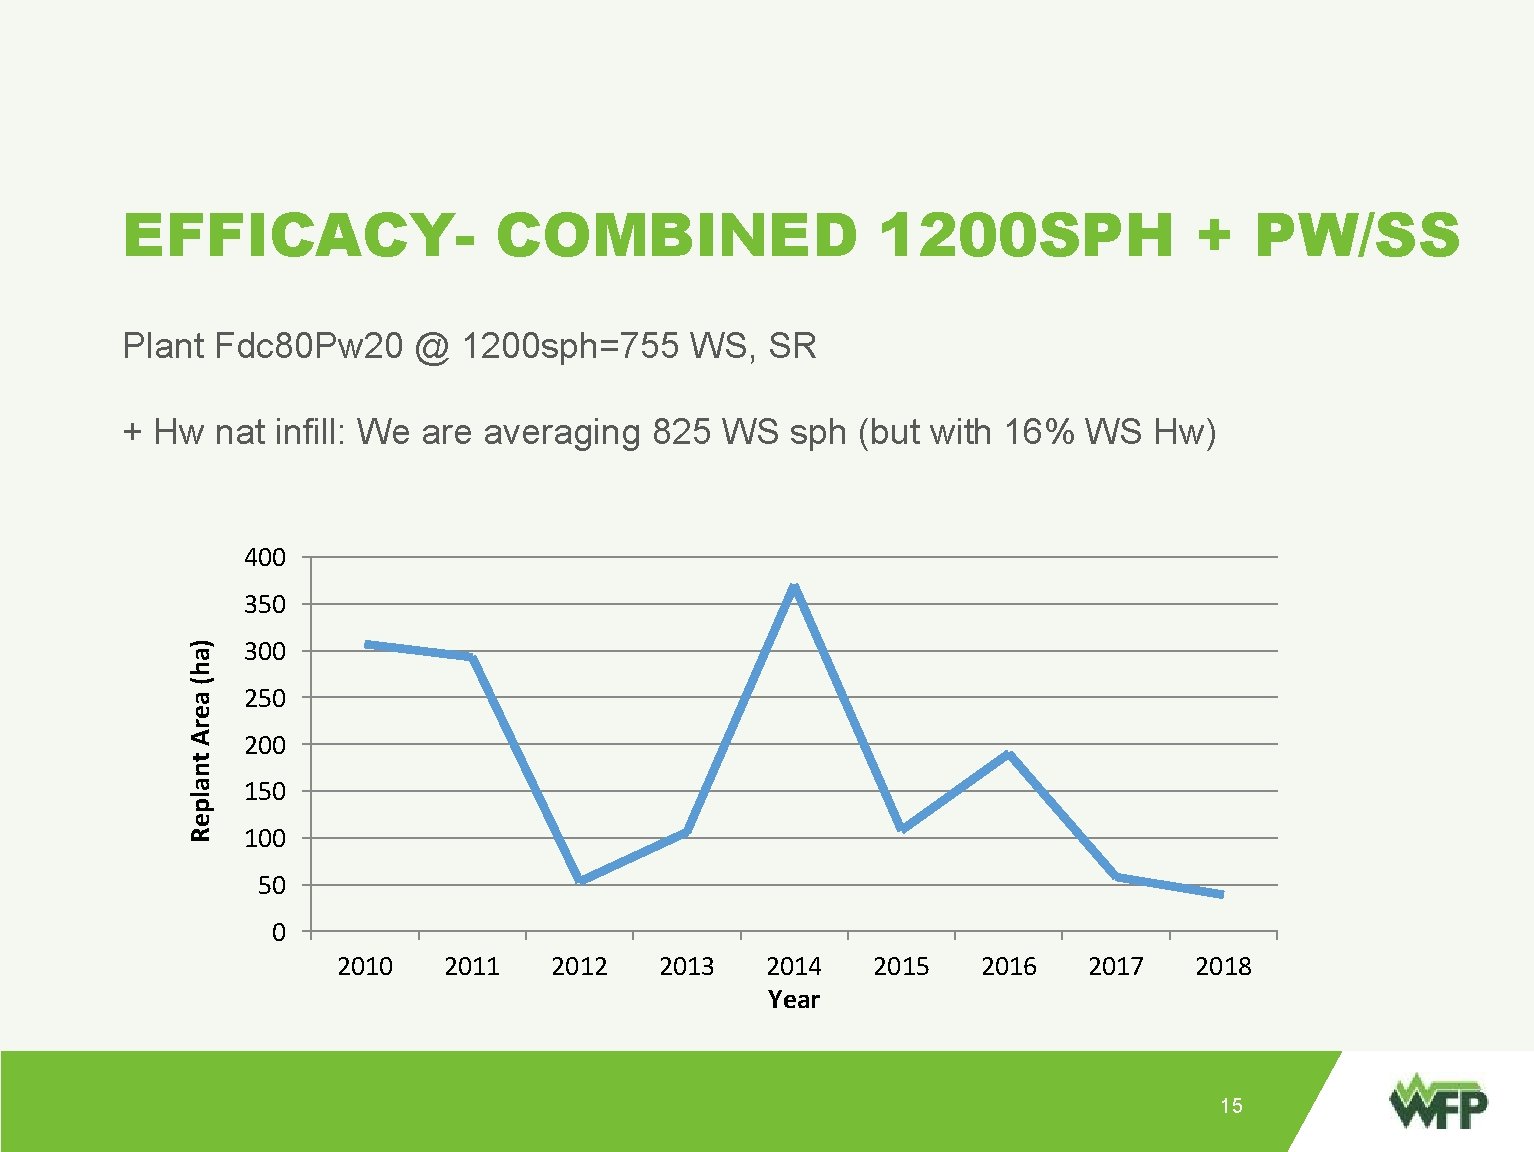 EFFICACY- COMBINED 1200 SPH + PW/SS Plant Fdc 80 Pw 20 @ 1200 sph=755